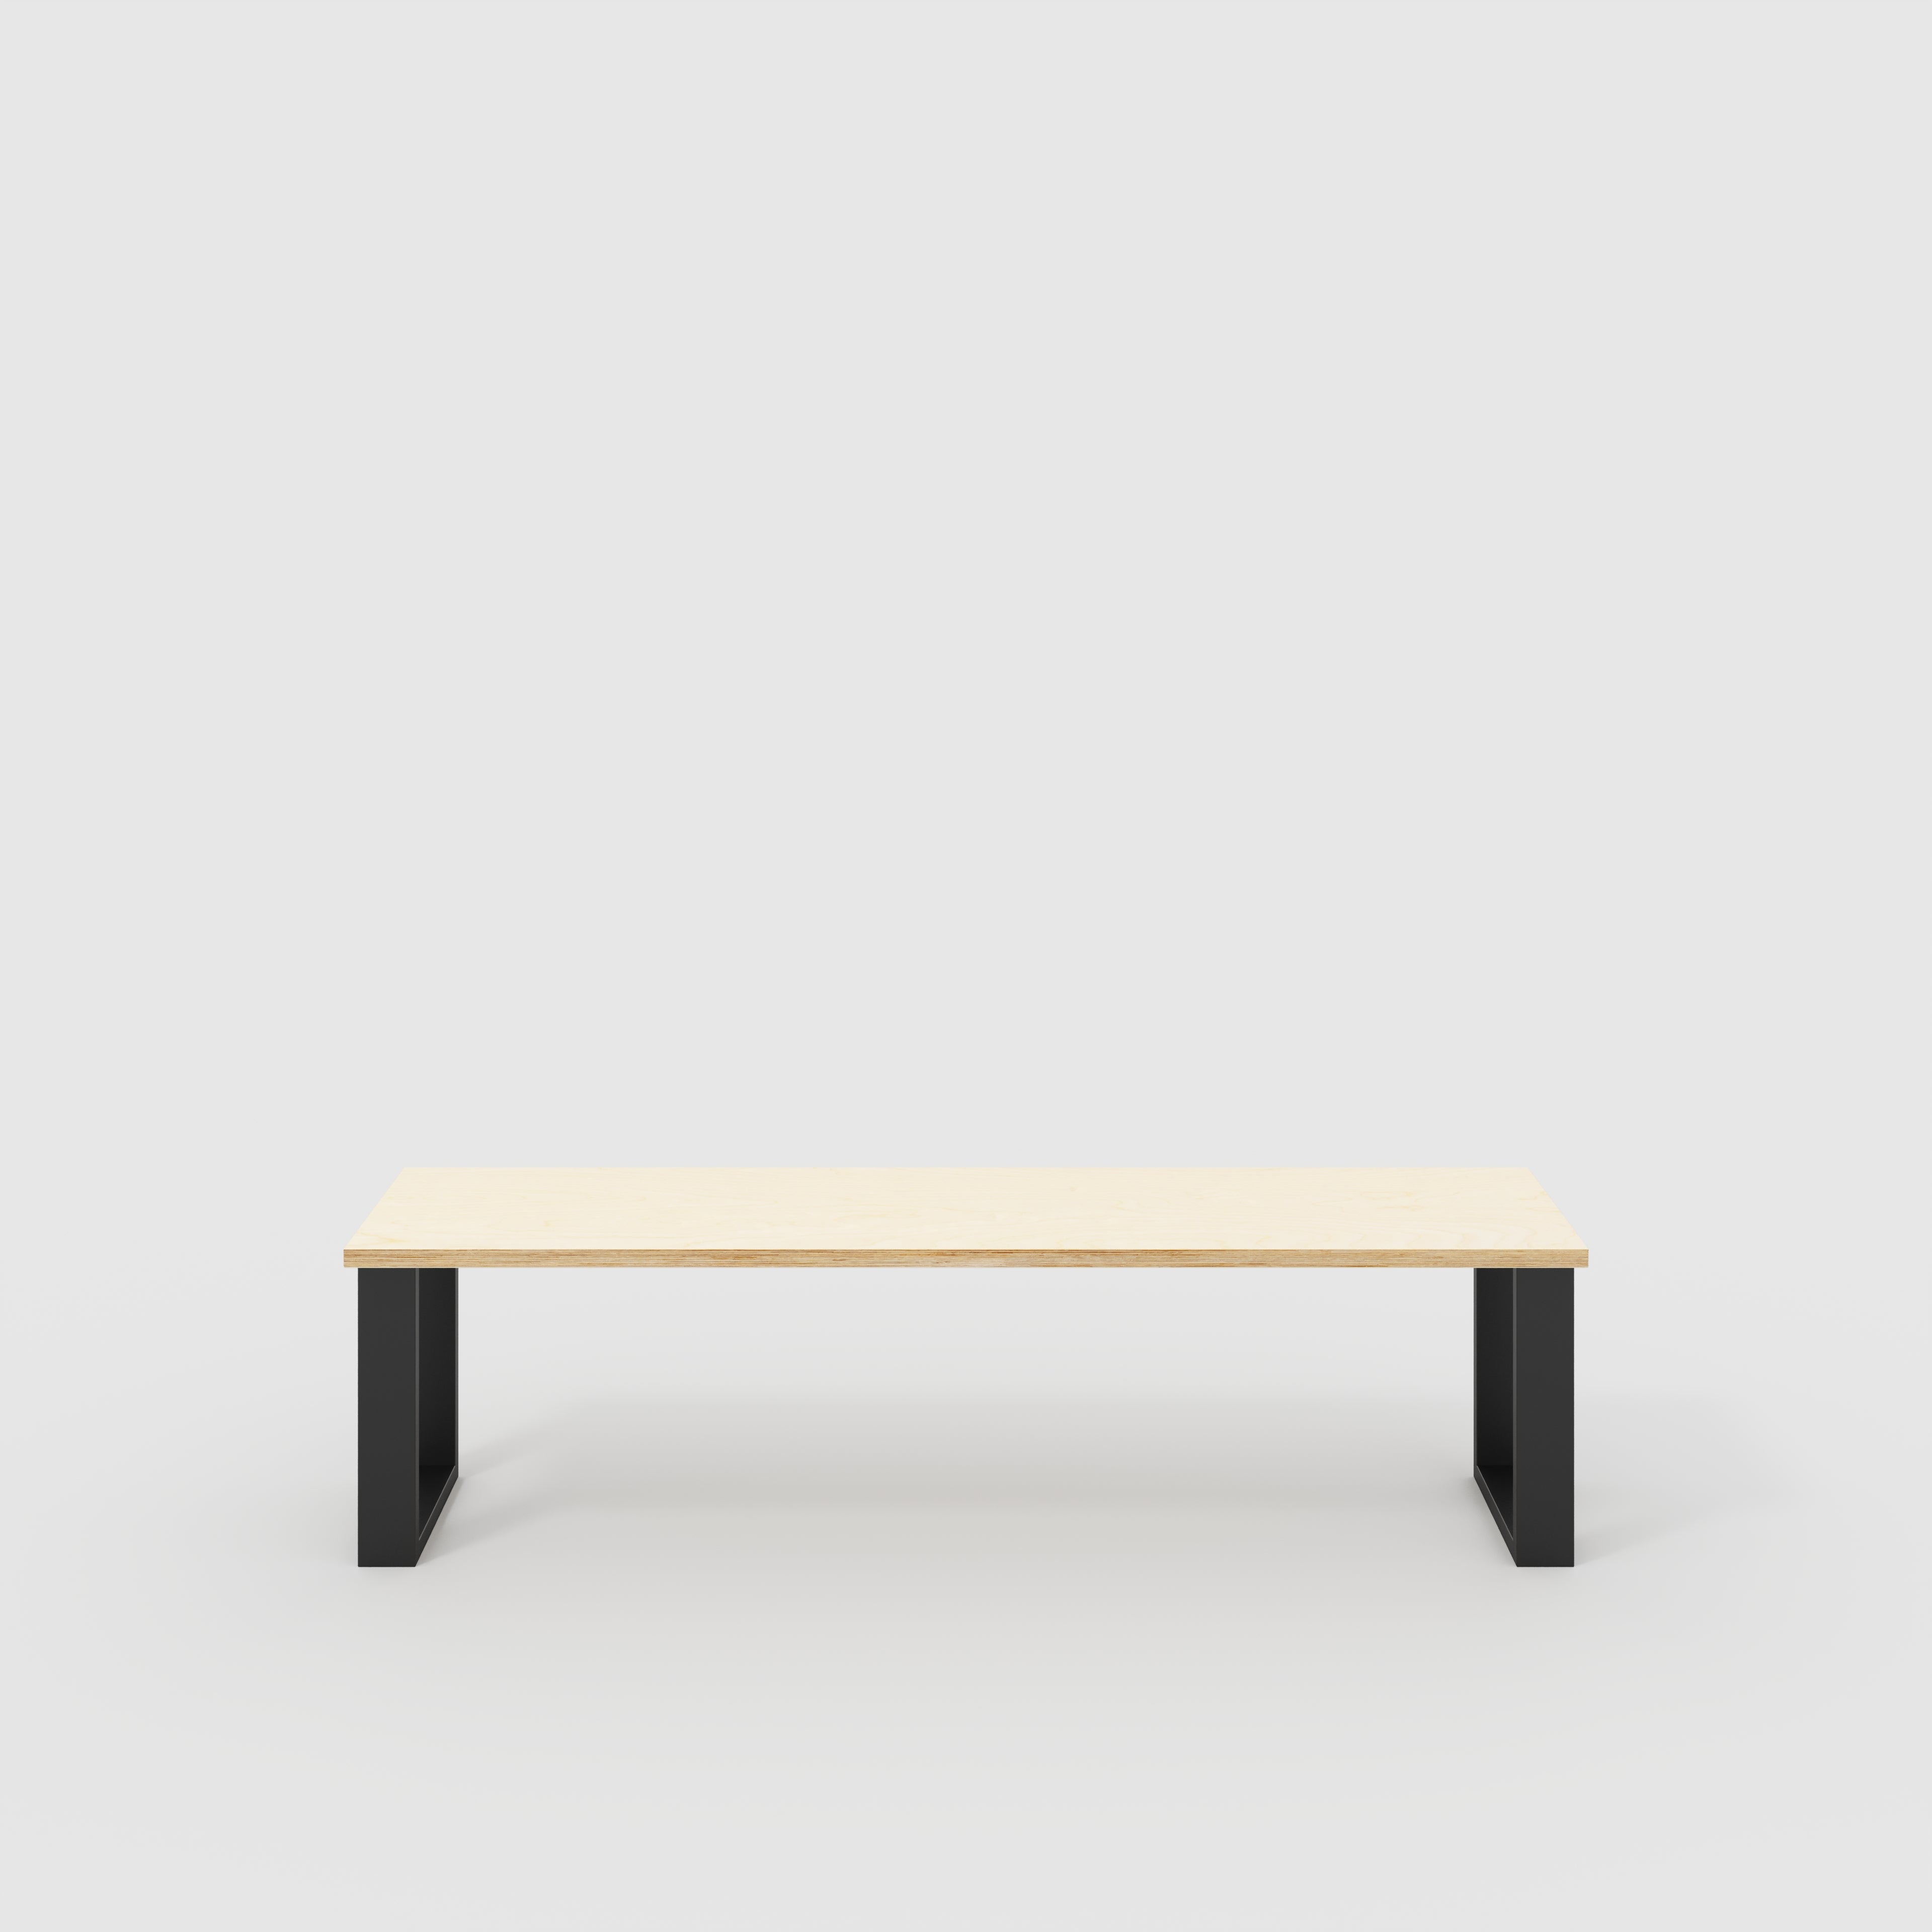 Bench Seat with Black Industrial Legs - Plywood Birch - 1600(w) x 400(d)